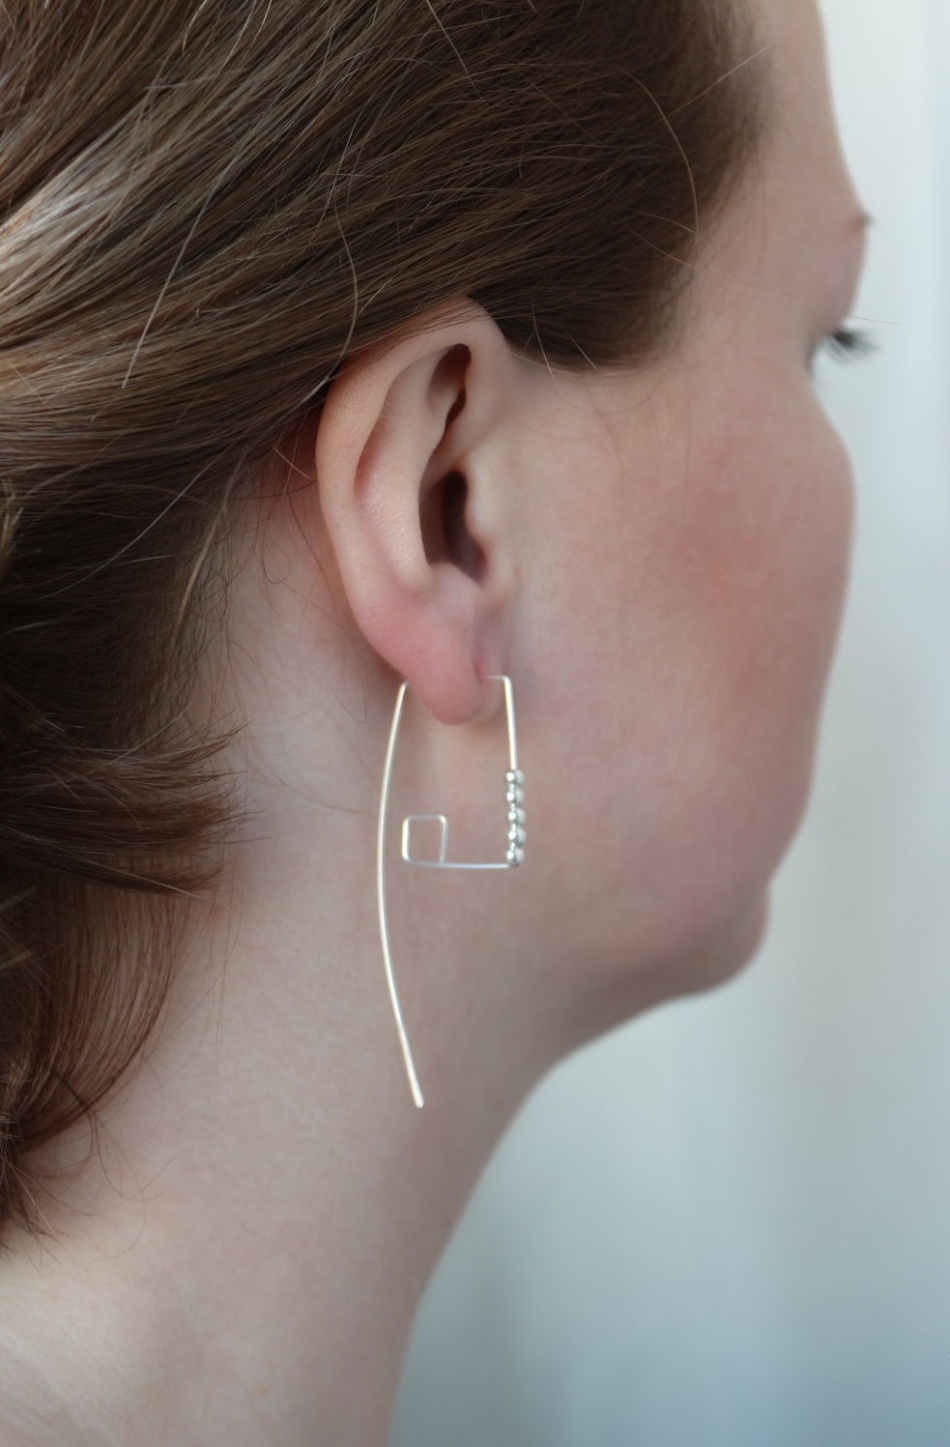 Another example of geometric earrings for spring-summer-2023